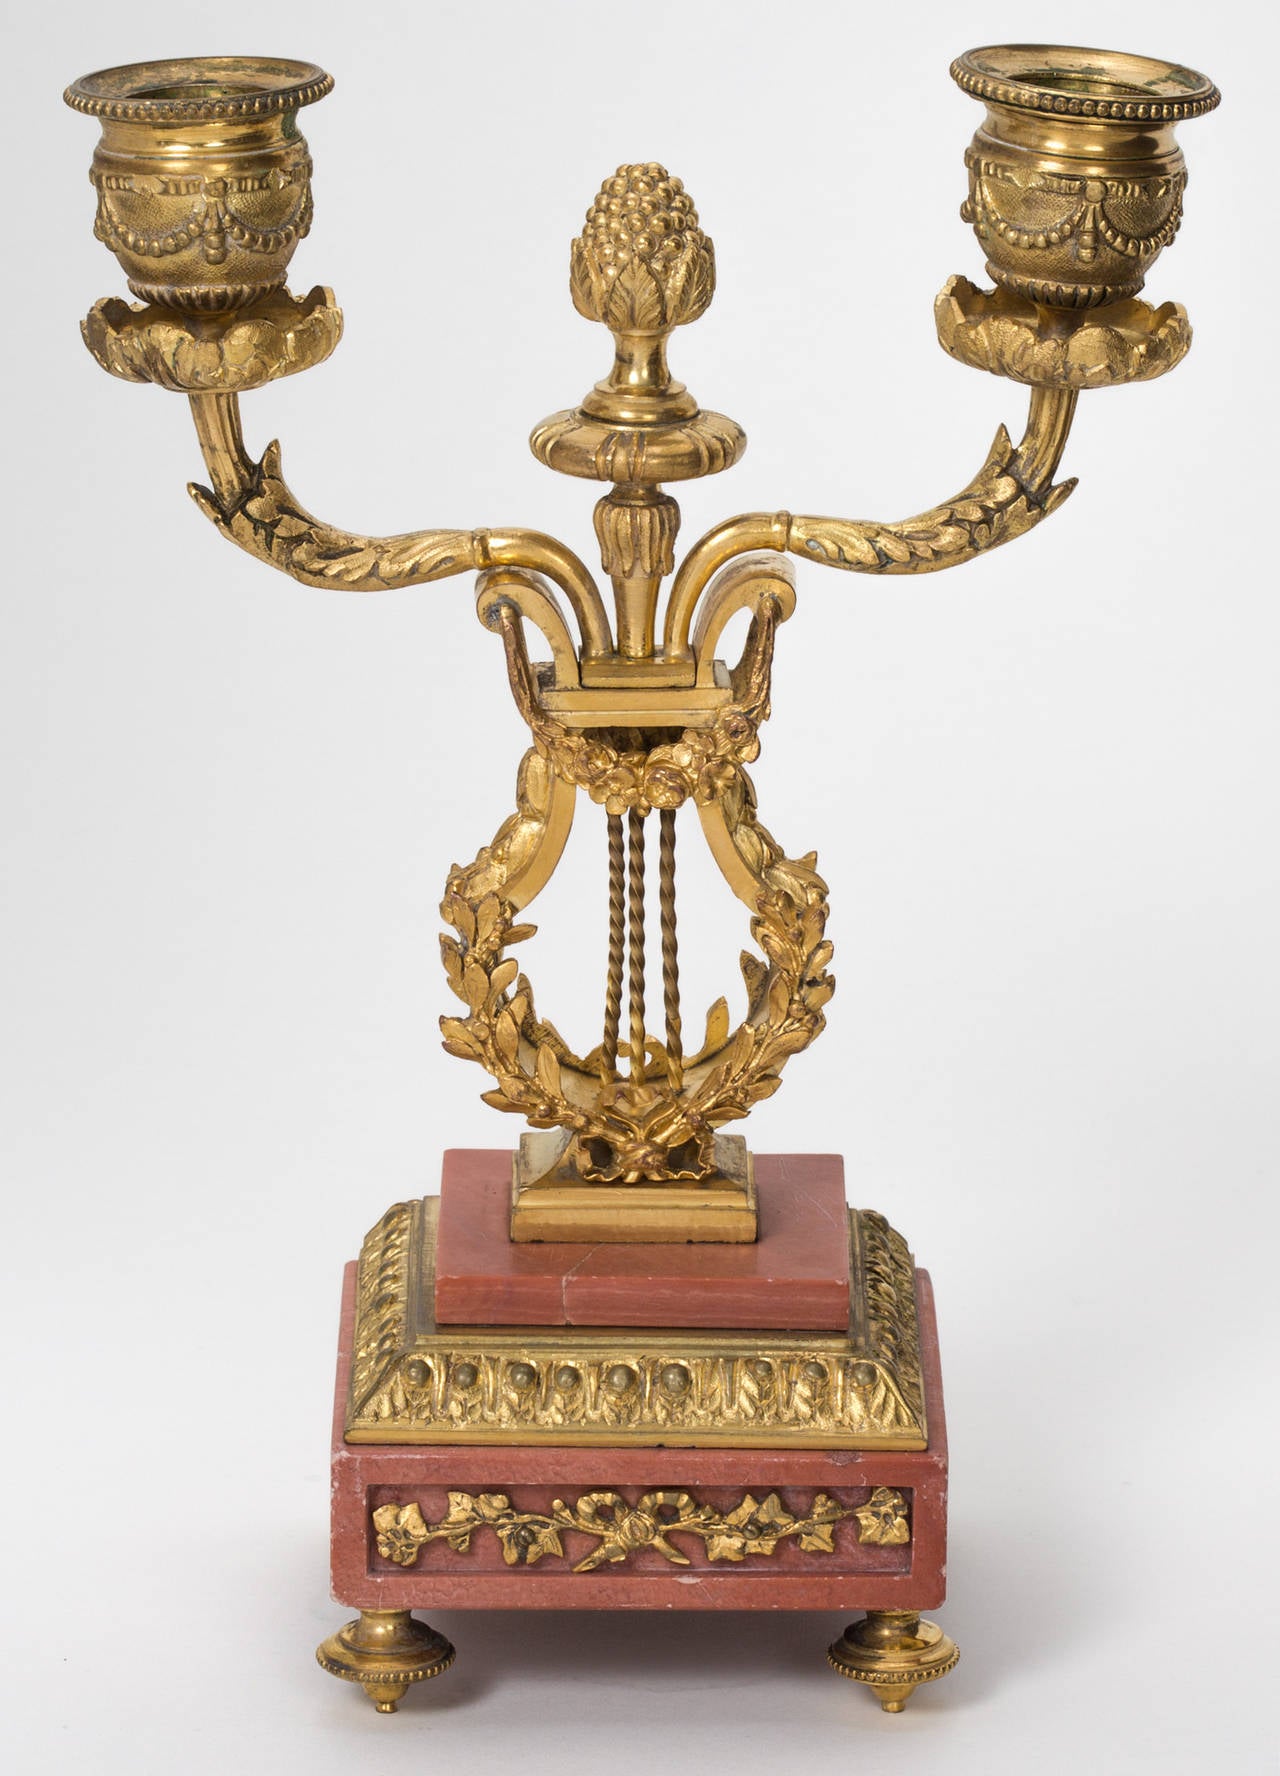 C.1860s France.   Beautiful two light bronze dore on marble stand.  Superb workmanship of bronze dore' with great details.